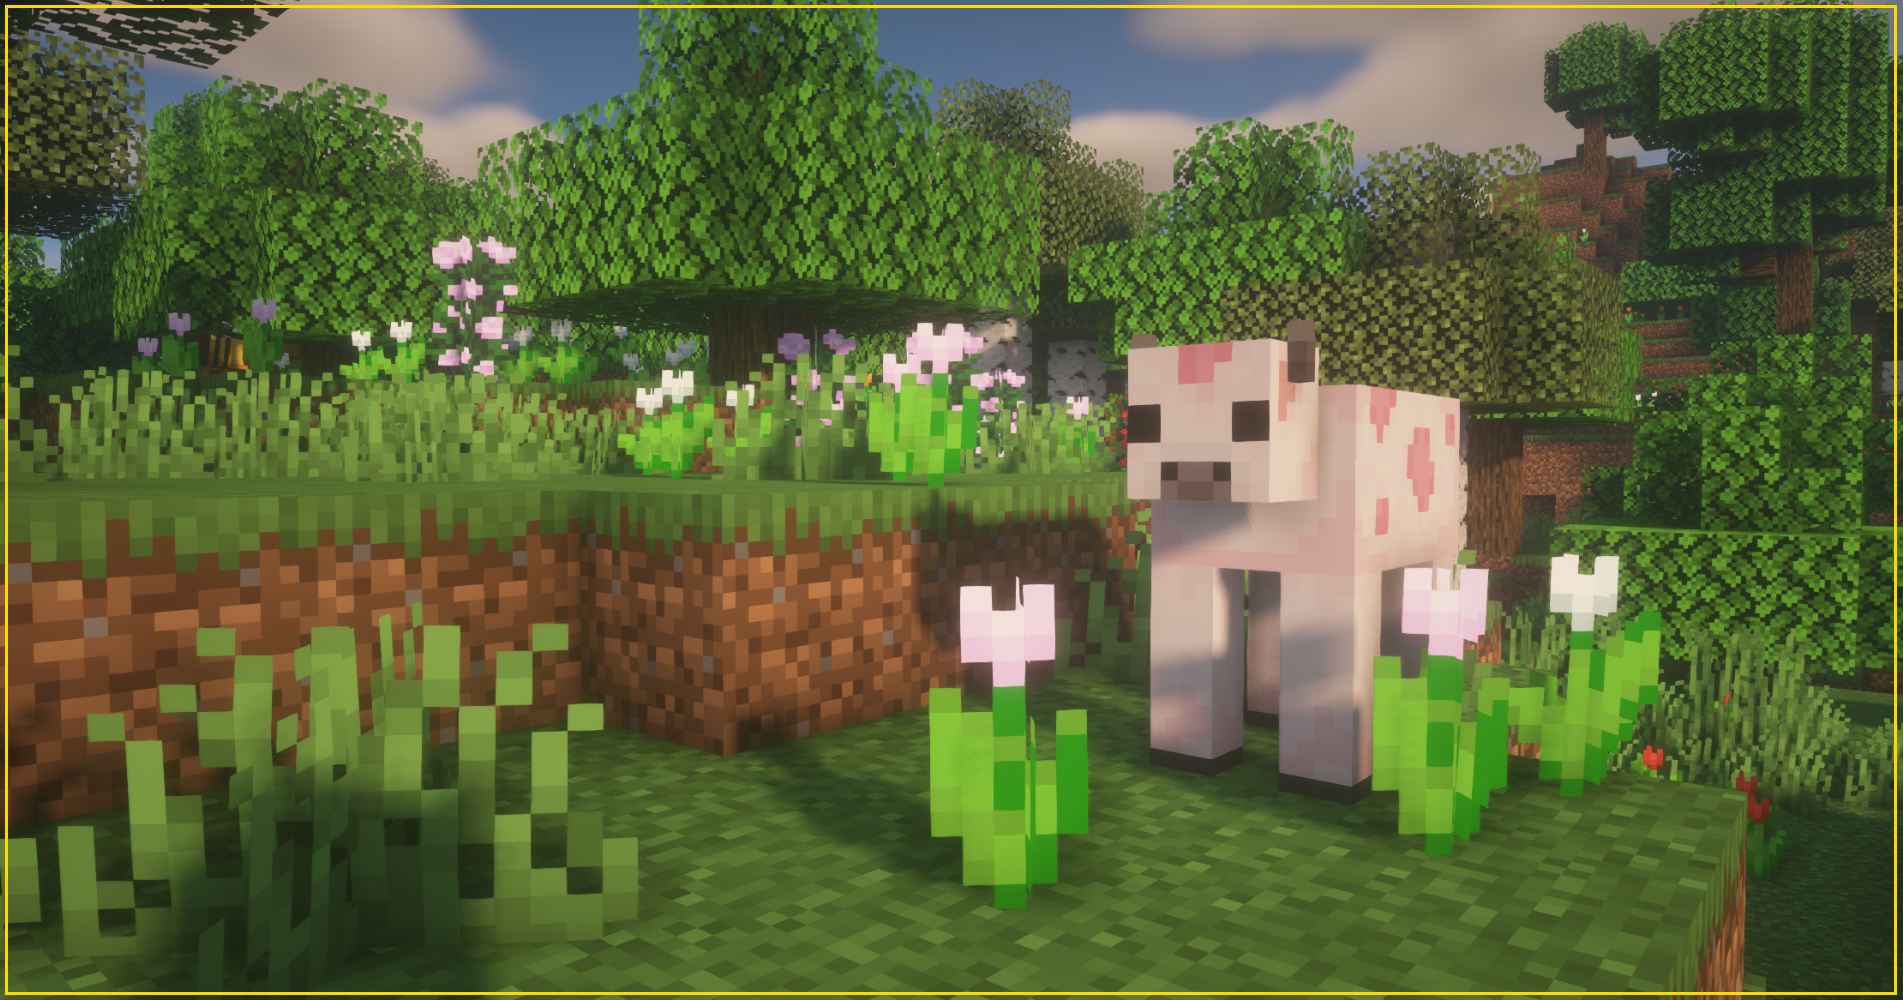 Strawberry cow in game!